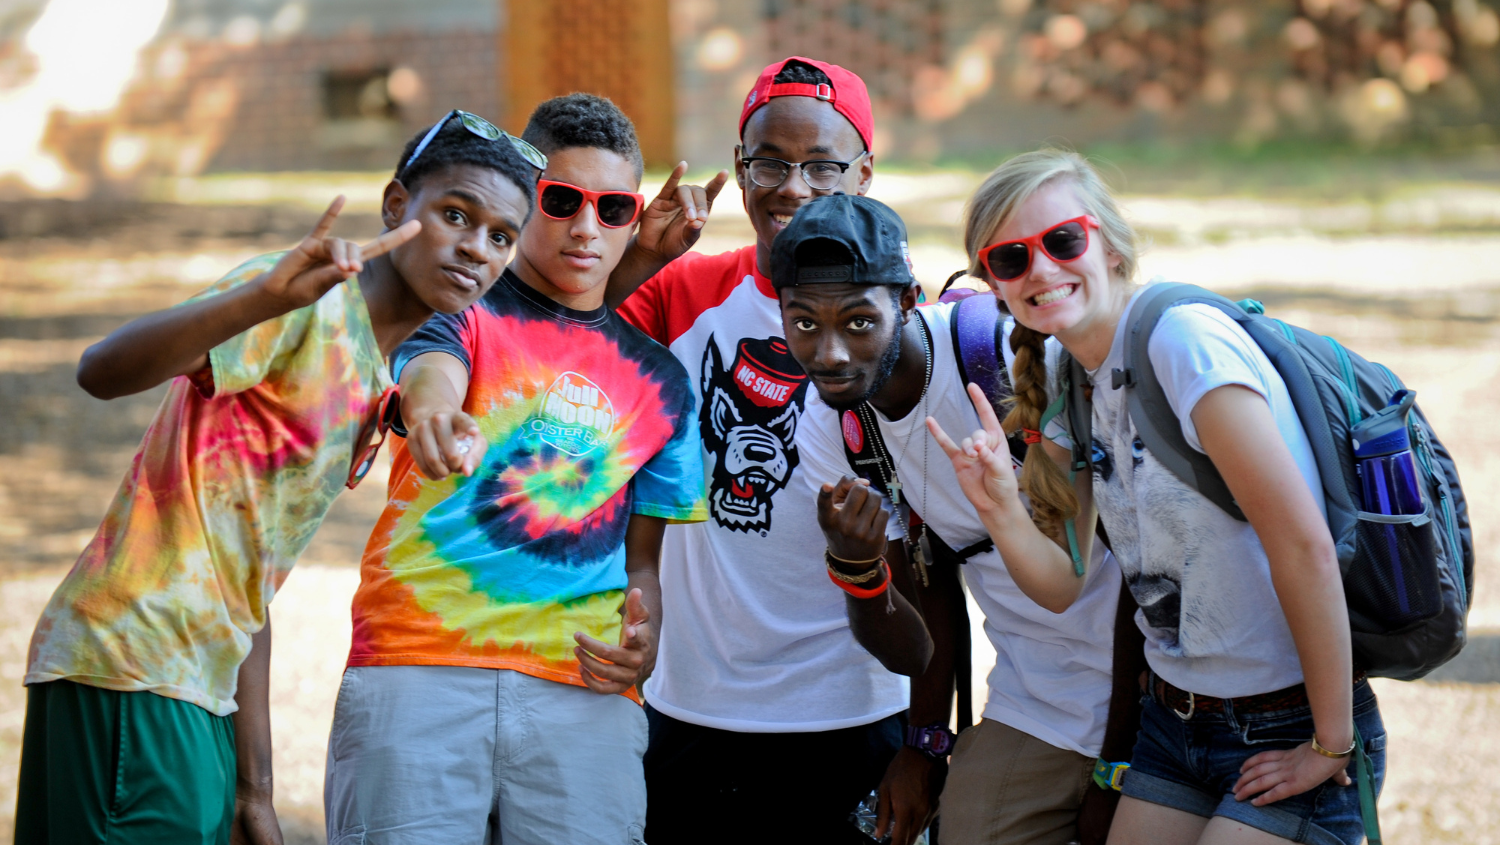 Group of students pose together making the Wolfpack sign.